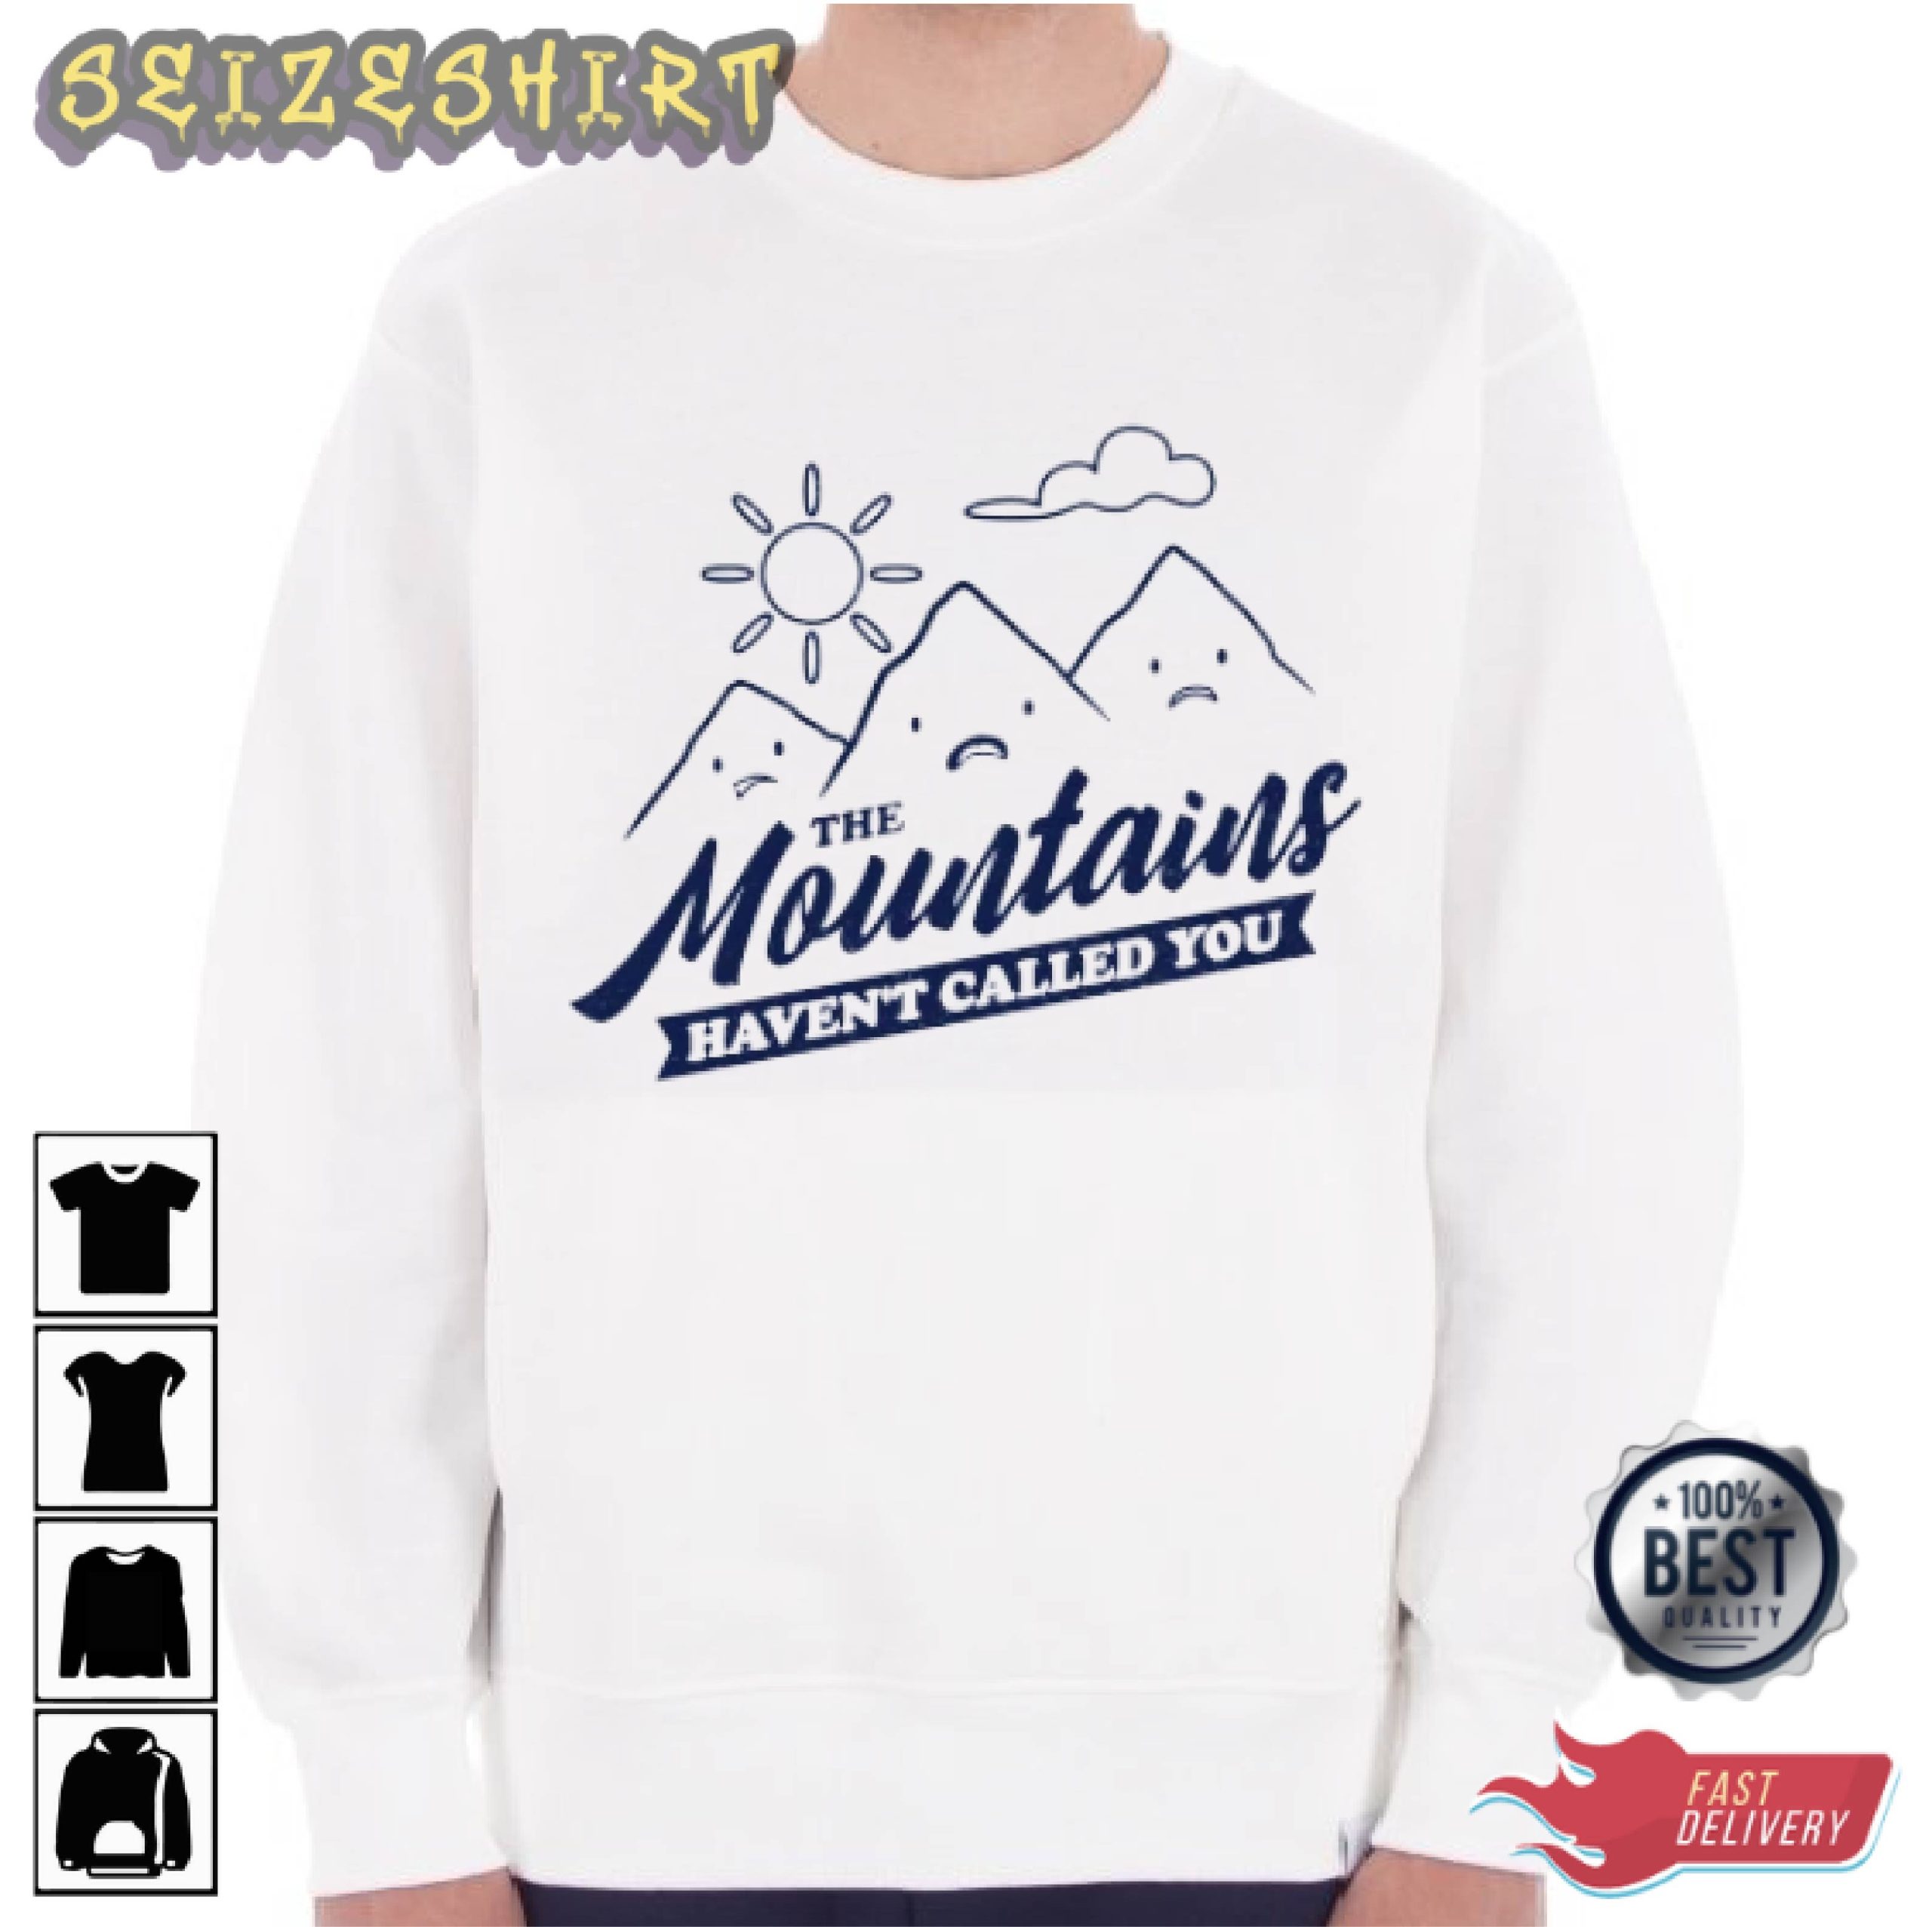 The Mountains Haven't Called You - Camping Graphic Tee